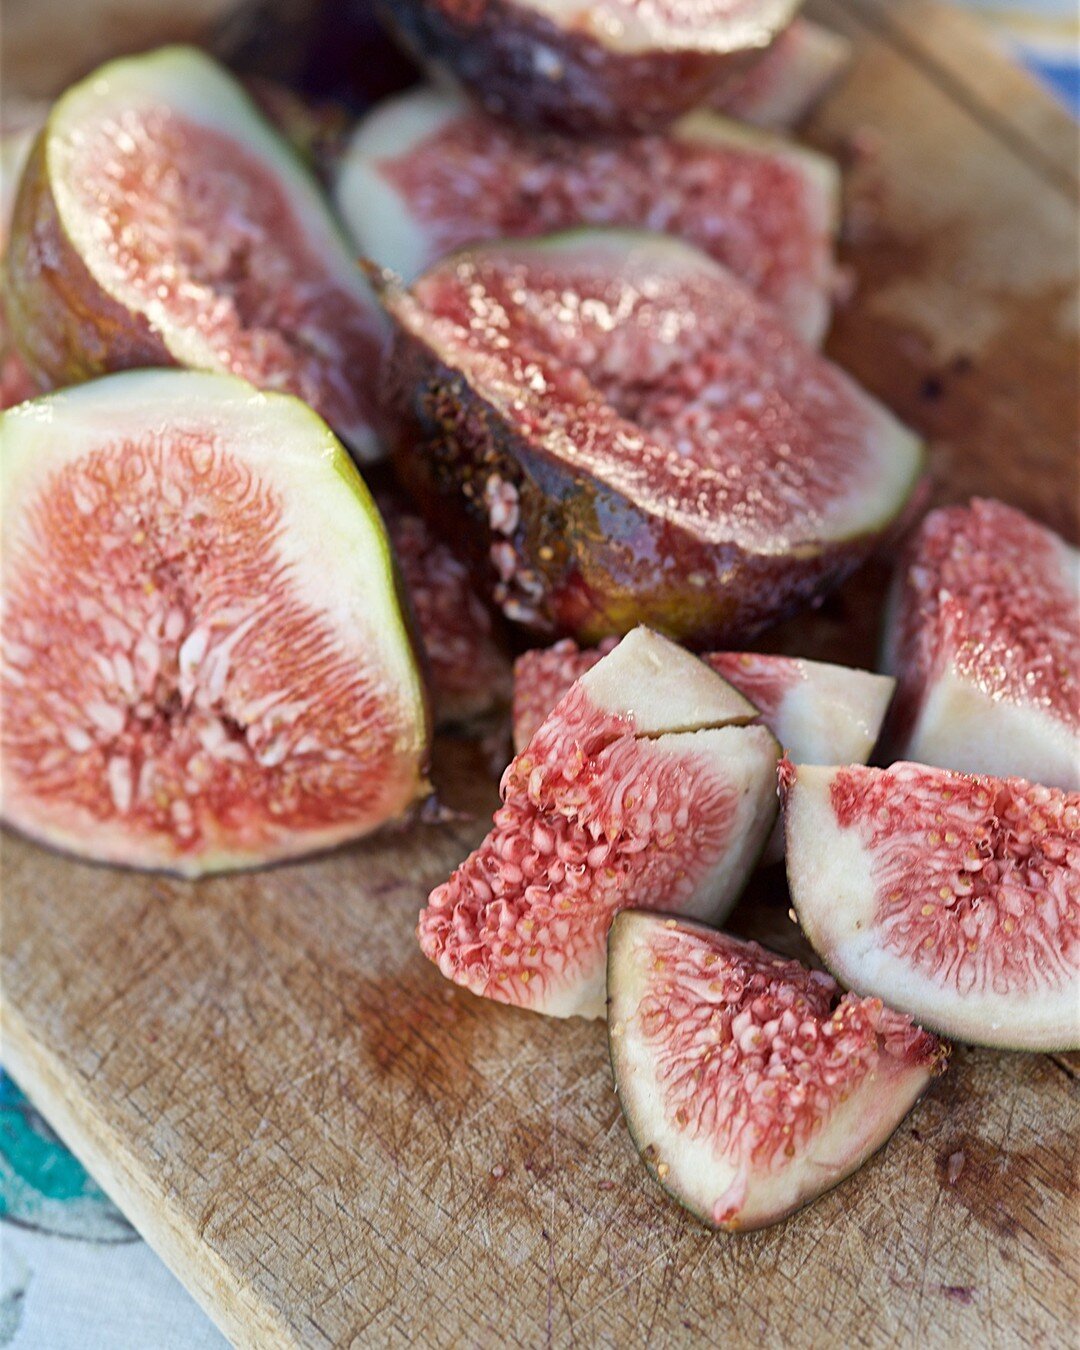 We couldn't be more excited to see Duncan from Tenterfield Figs at our Powerhouse market! Especially since his crop was devastated last year by hail storms. But he is here for a good time, not a long time...! He will be in residence for only a few we